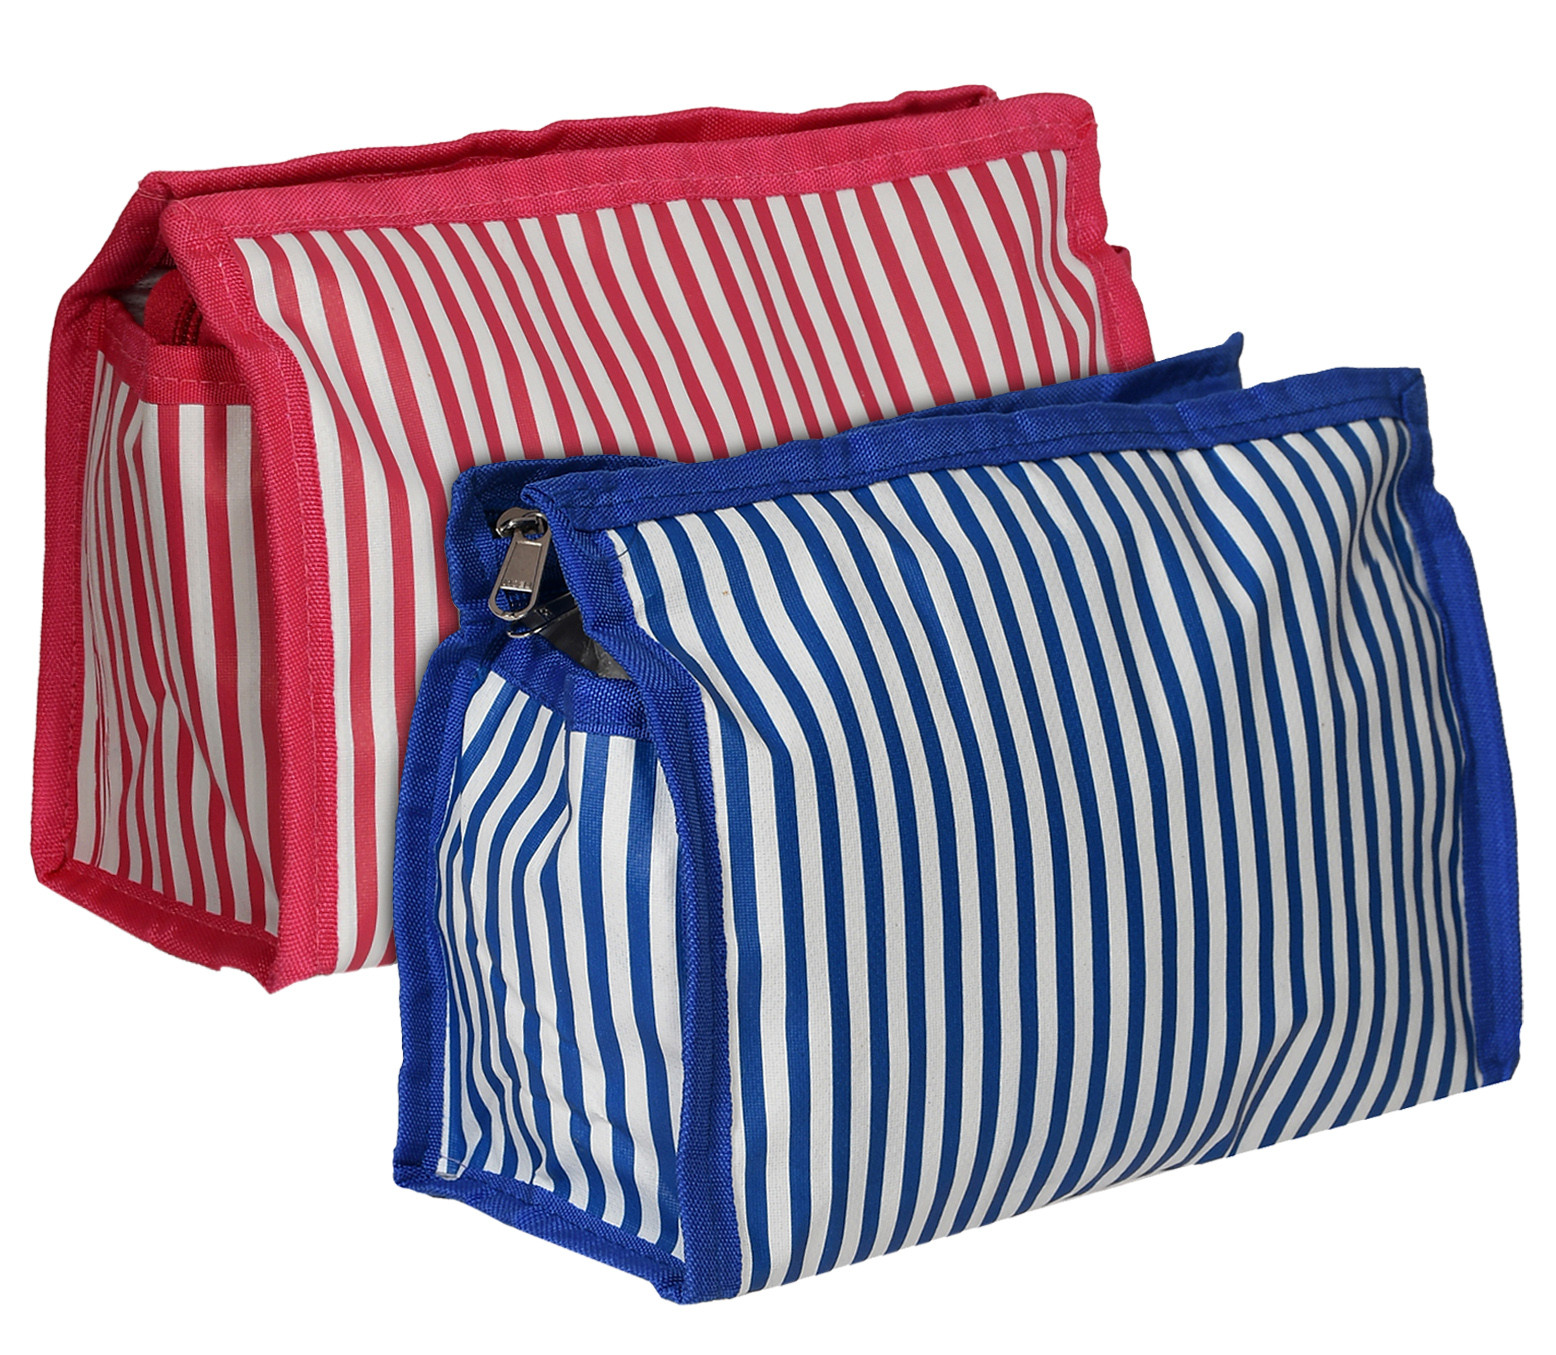 Kuber Industries Lining Print PVC Toiletry Bag For Home & Travelling With 3 Main Zipper (Blue & Pink) 54KM4354